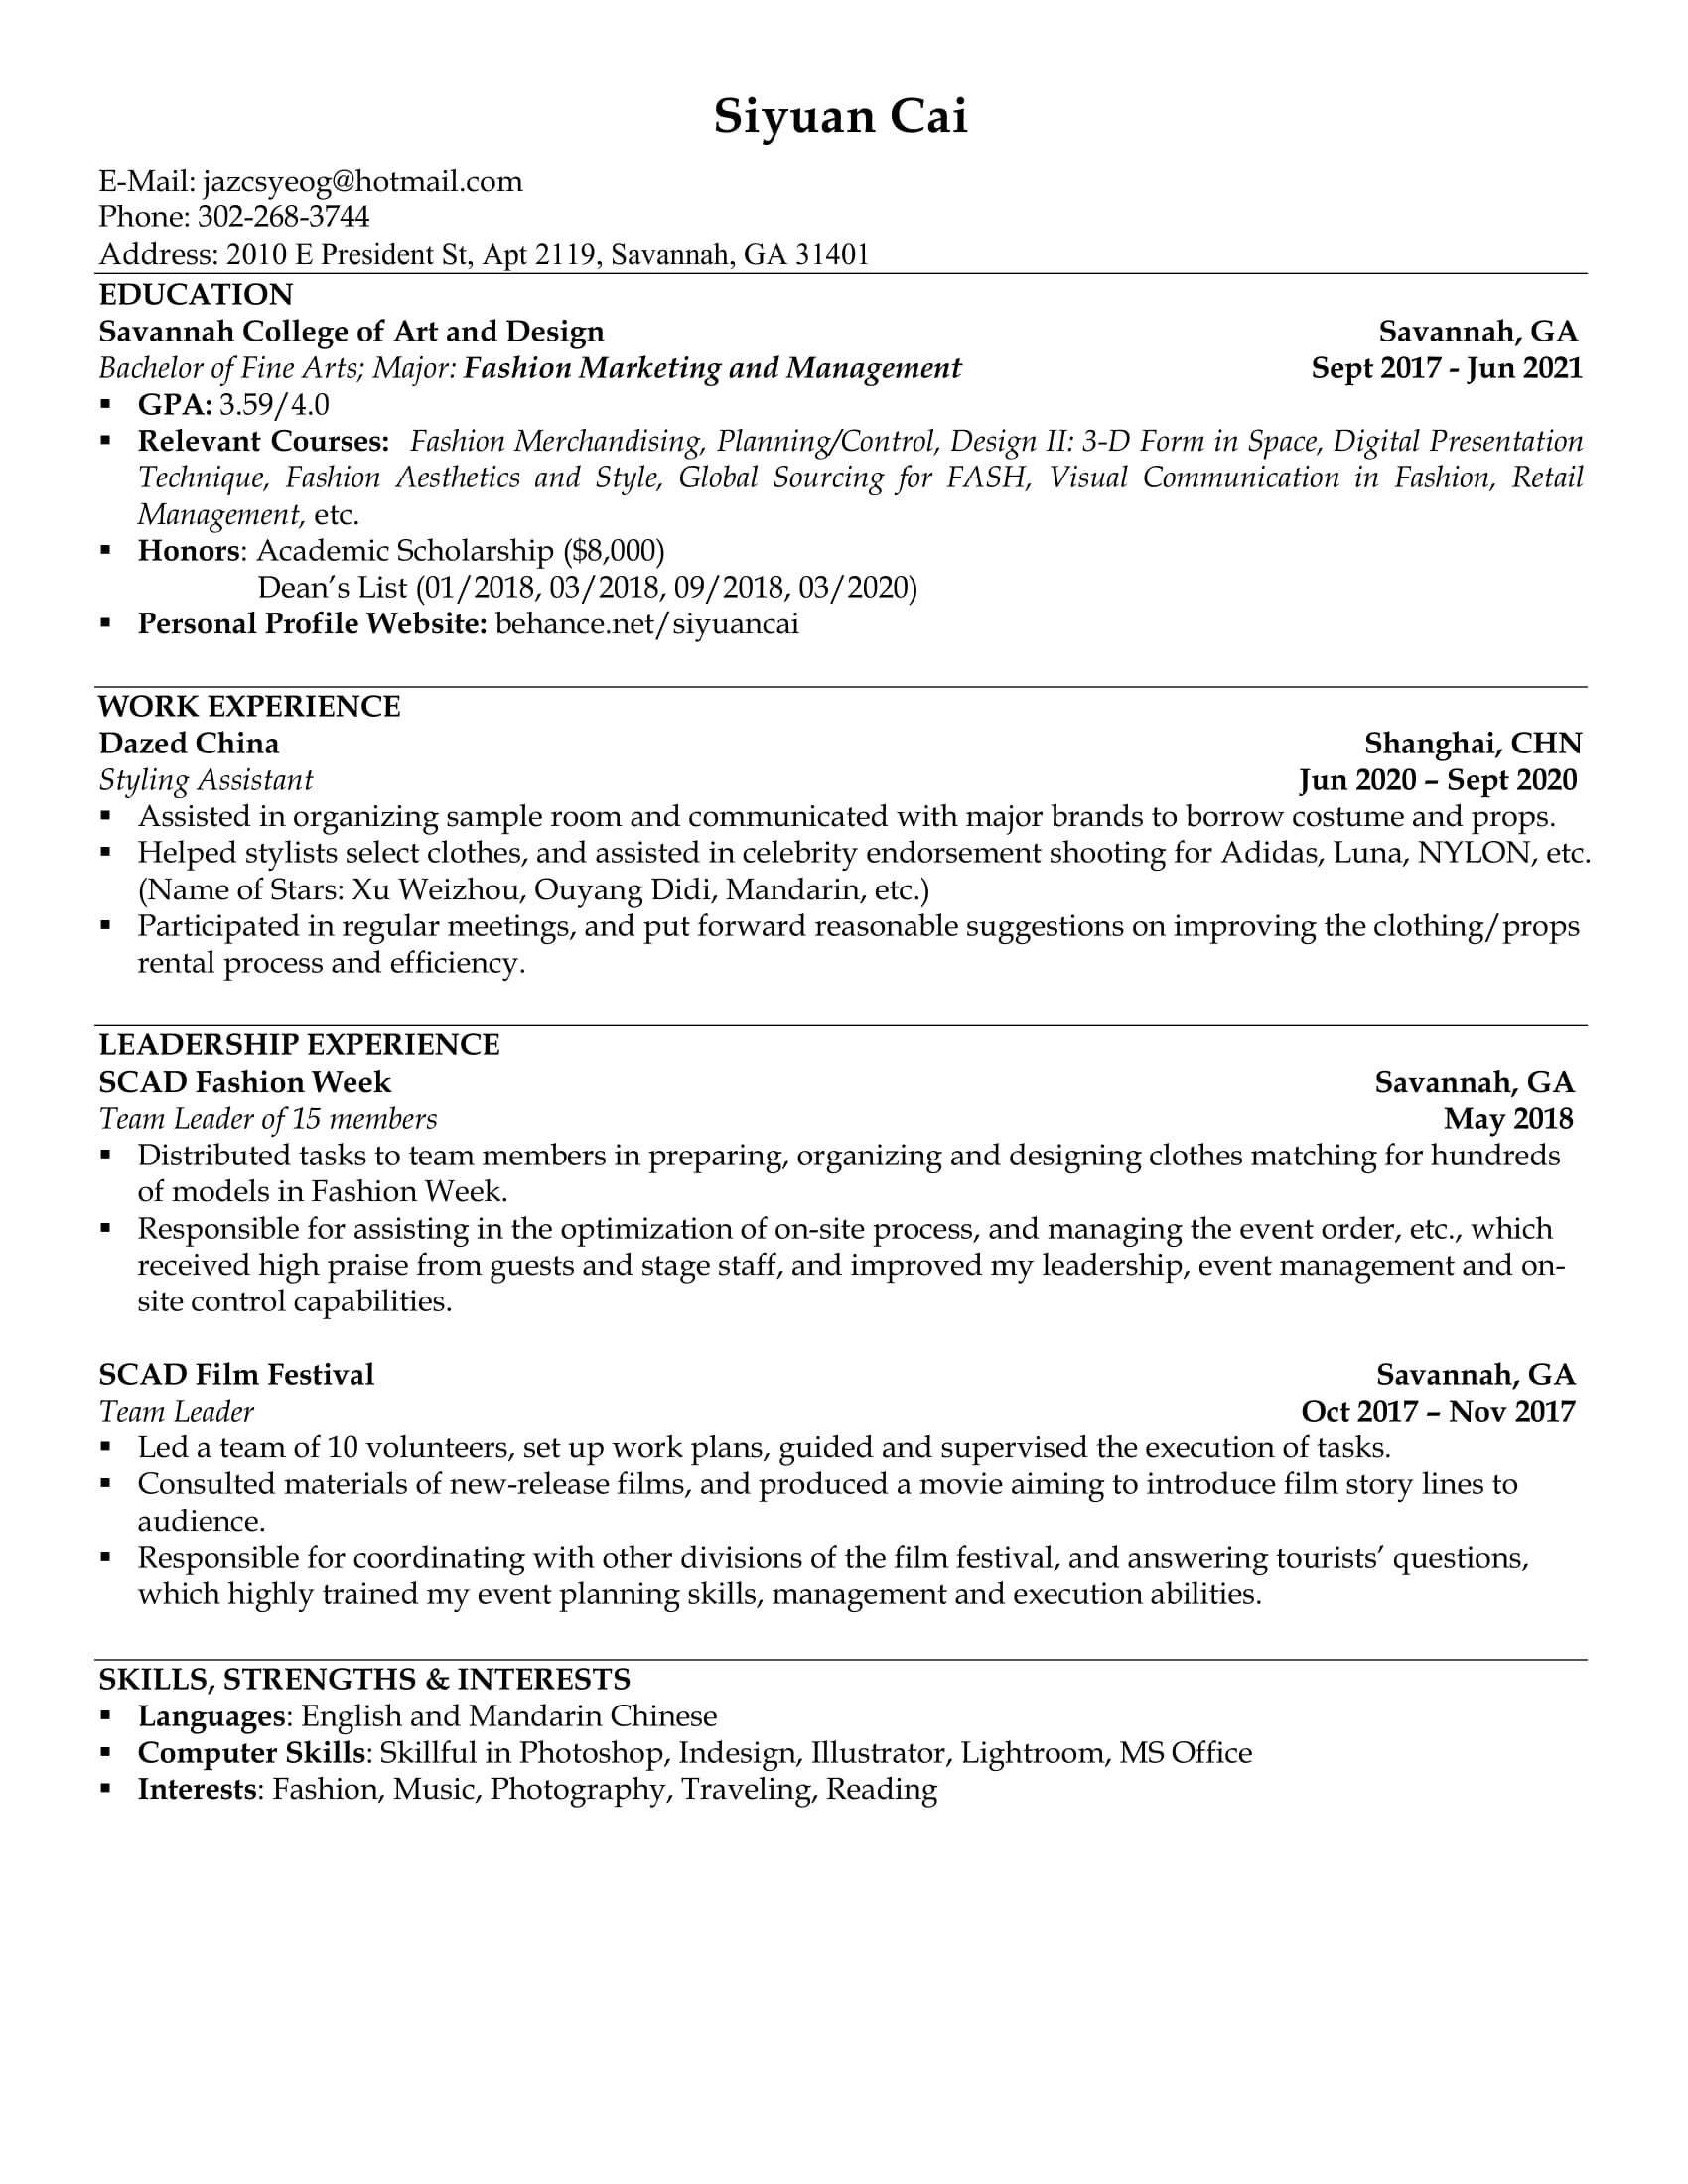 Resume Cover Letter Siyuan Cai